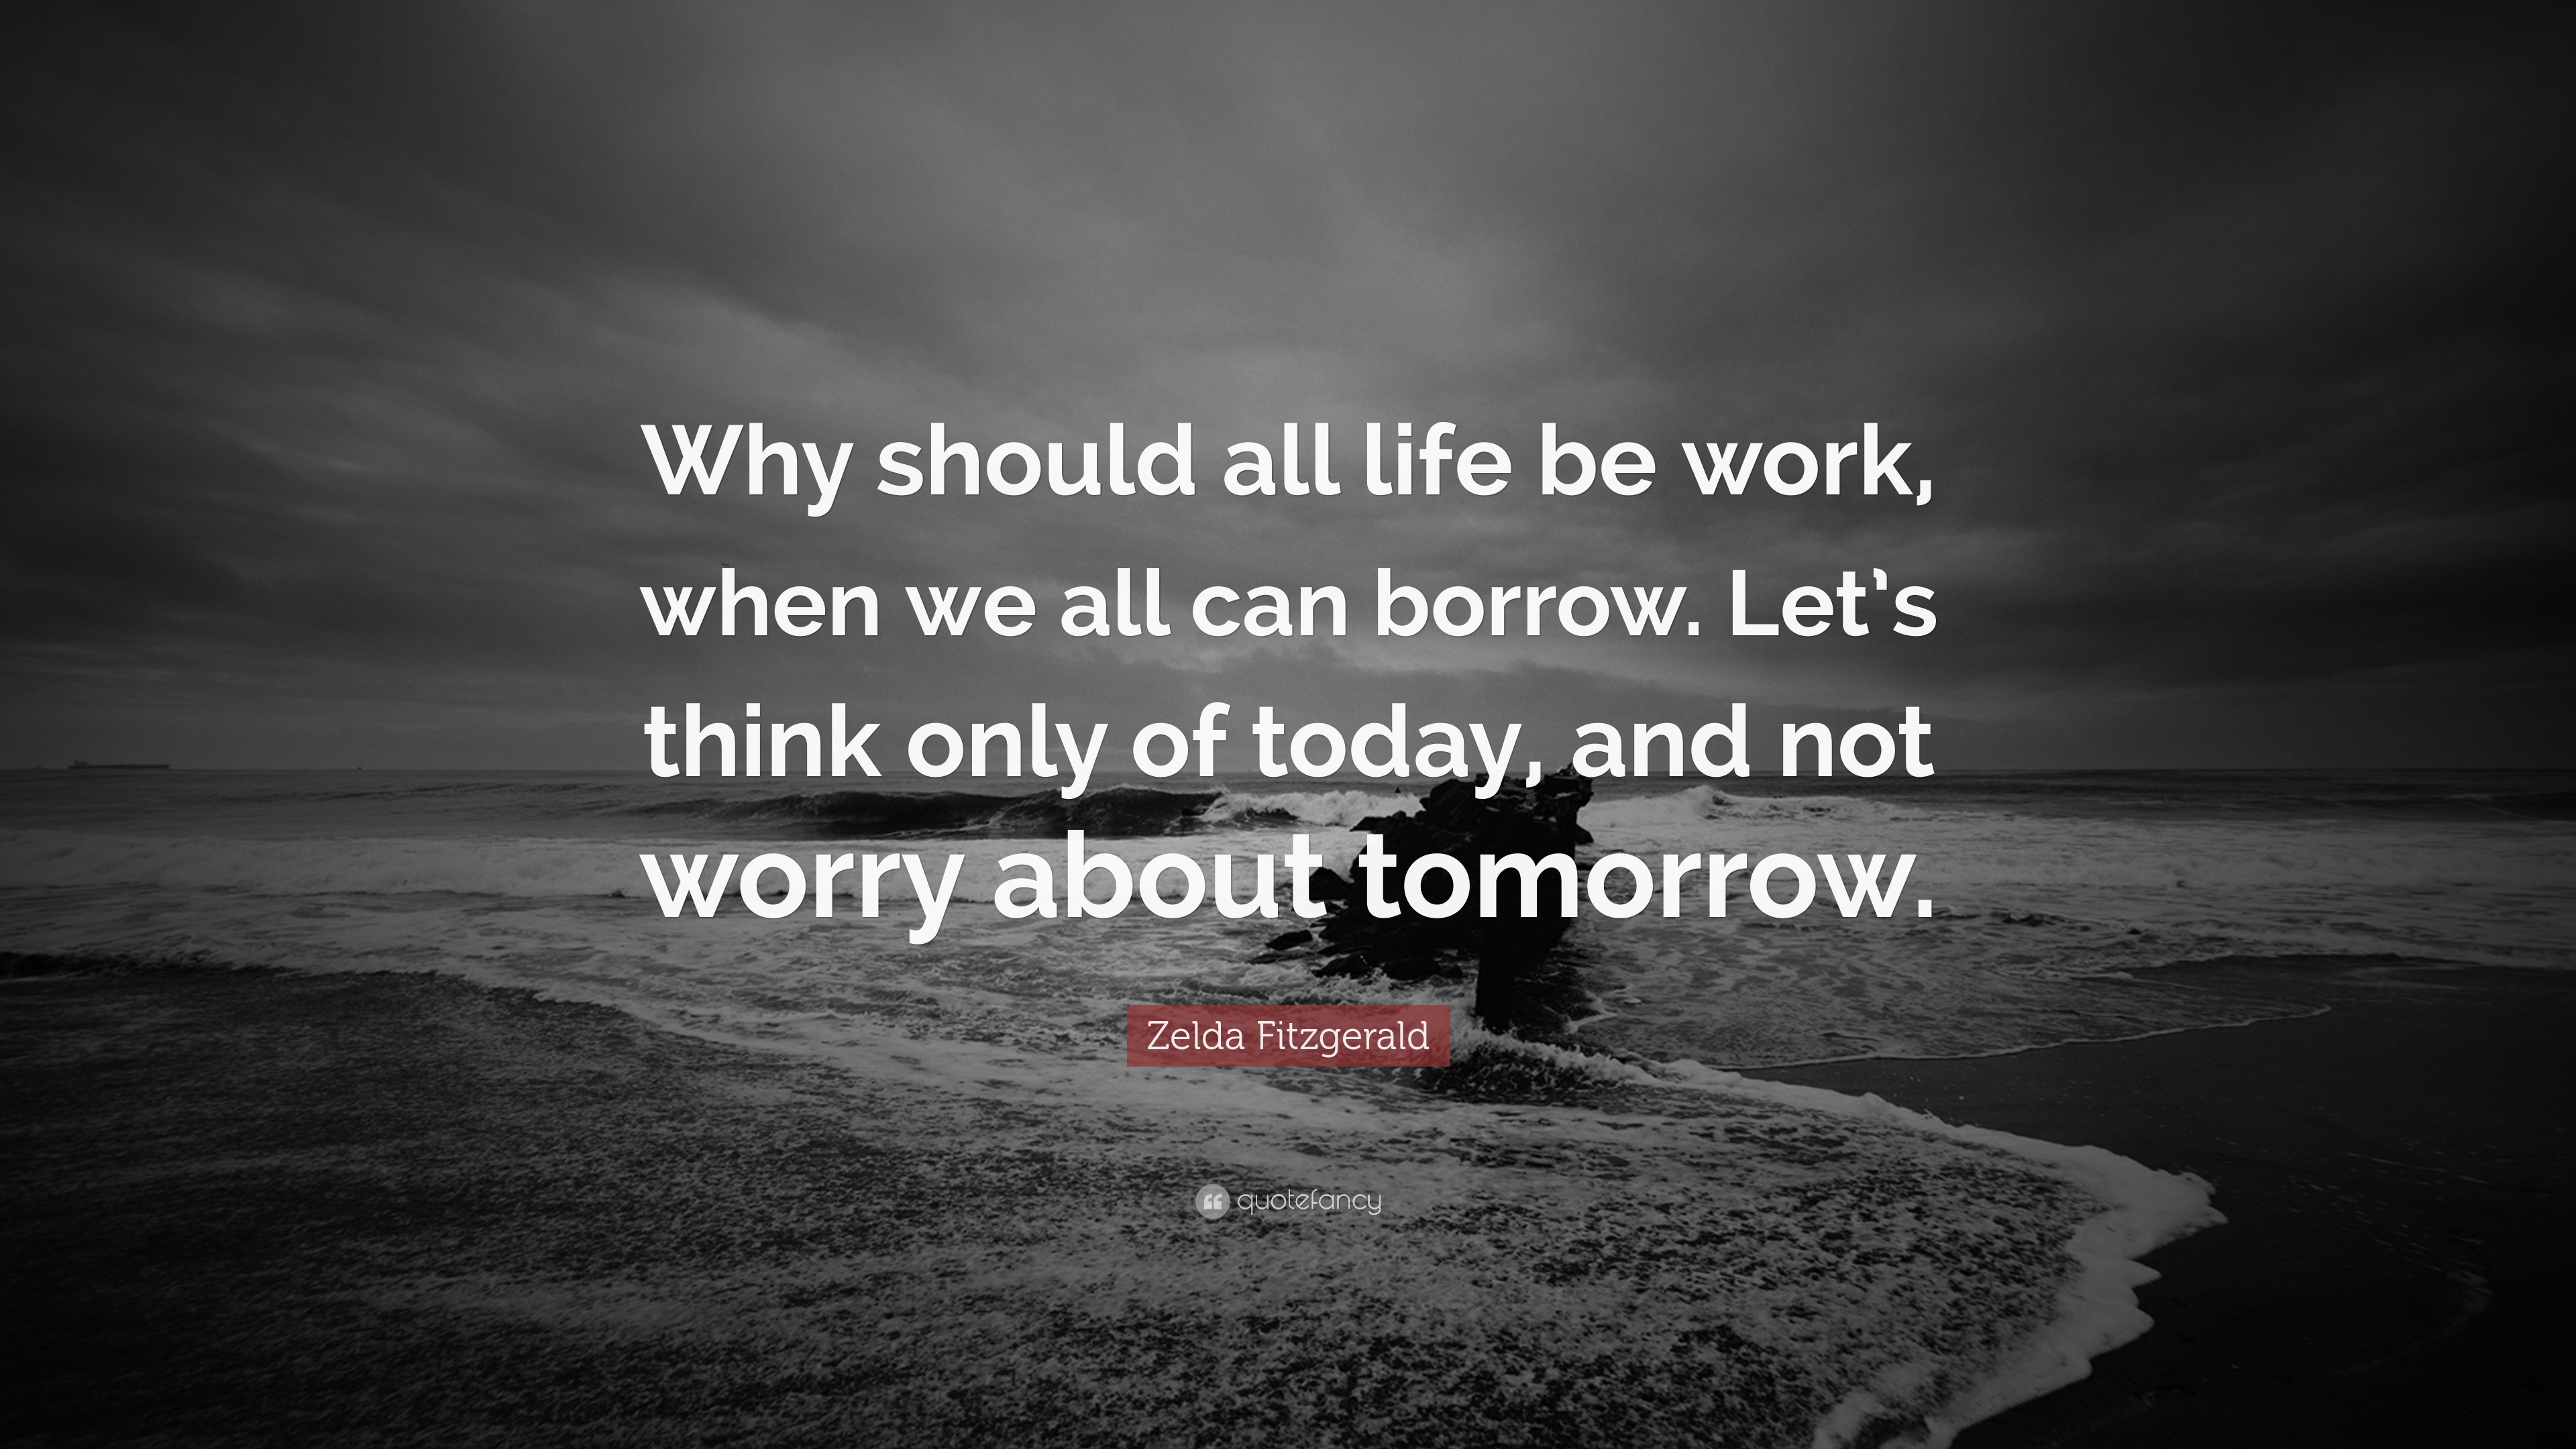 Zelda Fitzgerald Quote: “Why should all life be work, when we all can ...